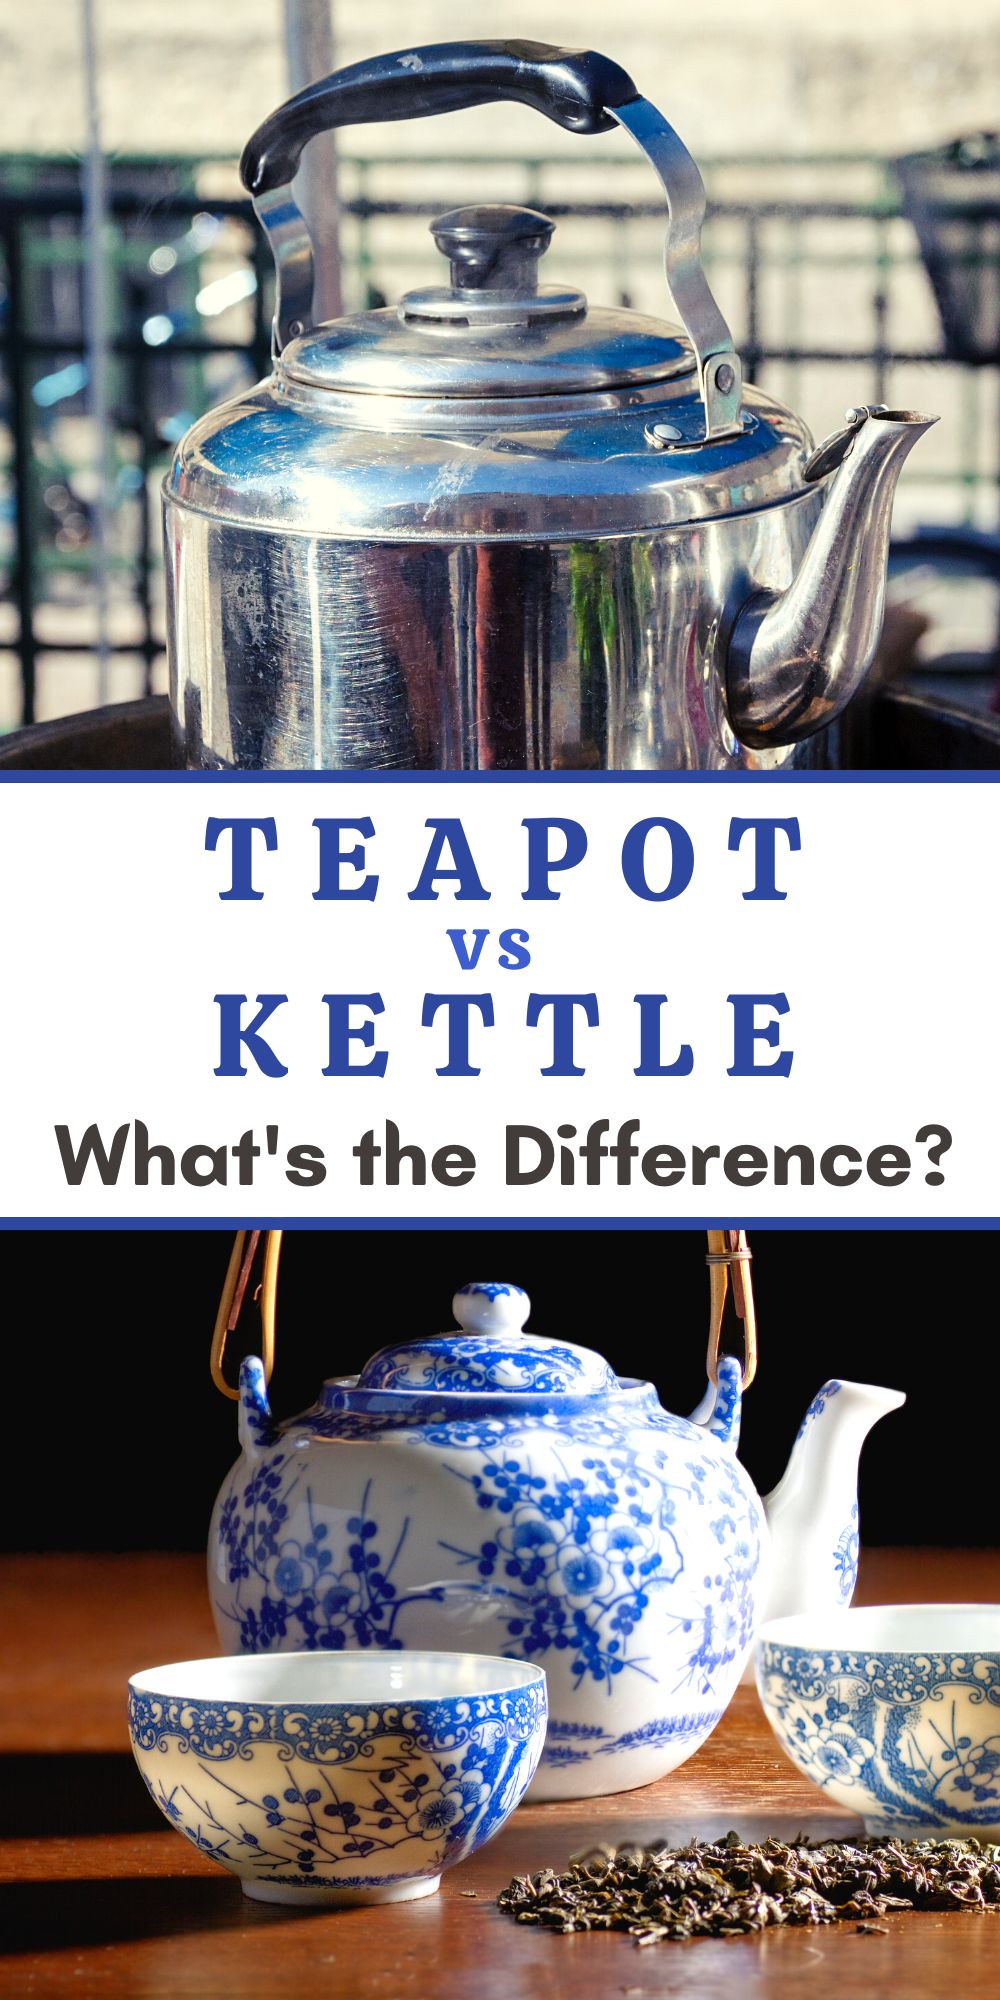 Difference Between a Teapot and Kettle